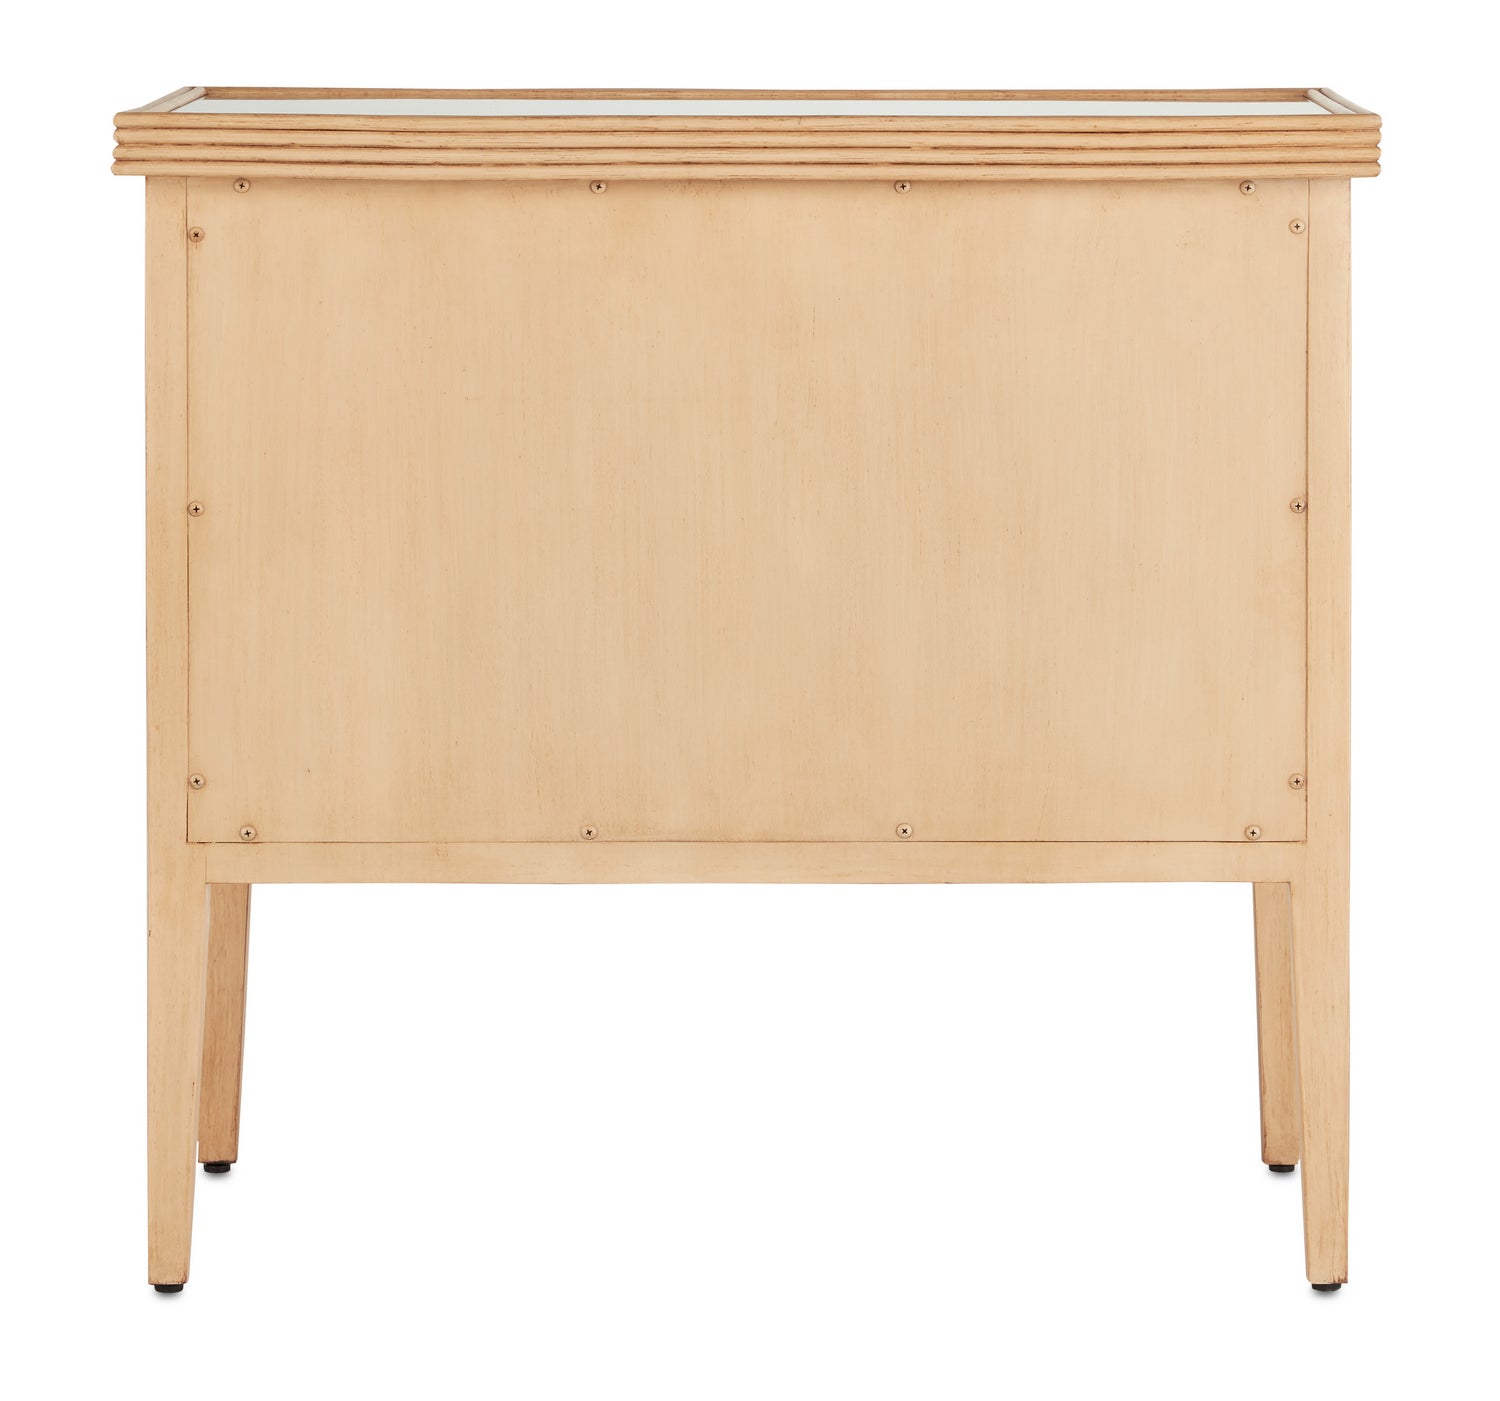 Chest from the Santos collection in Sea Sand/Brushed Brass finish